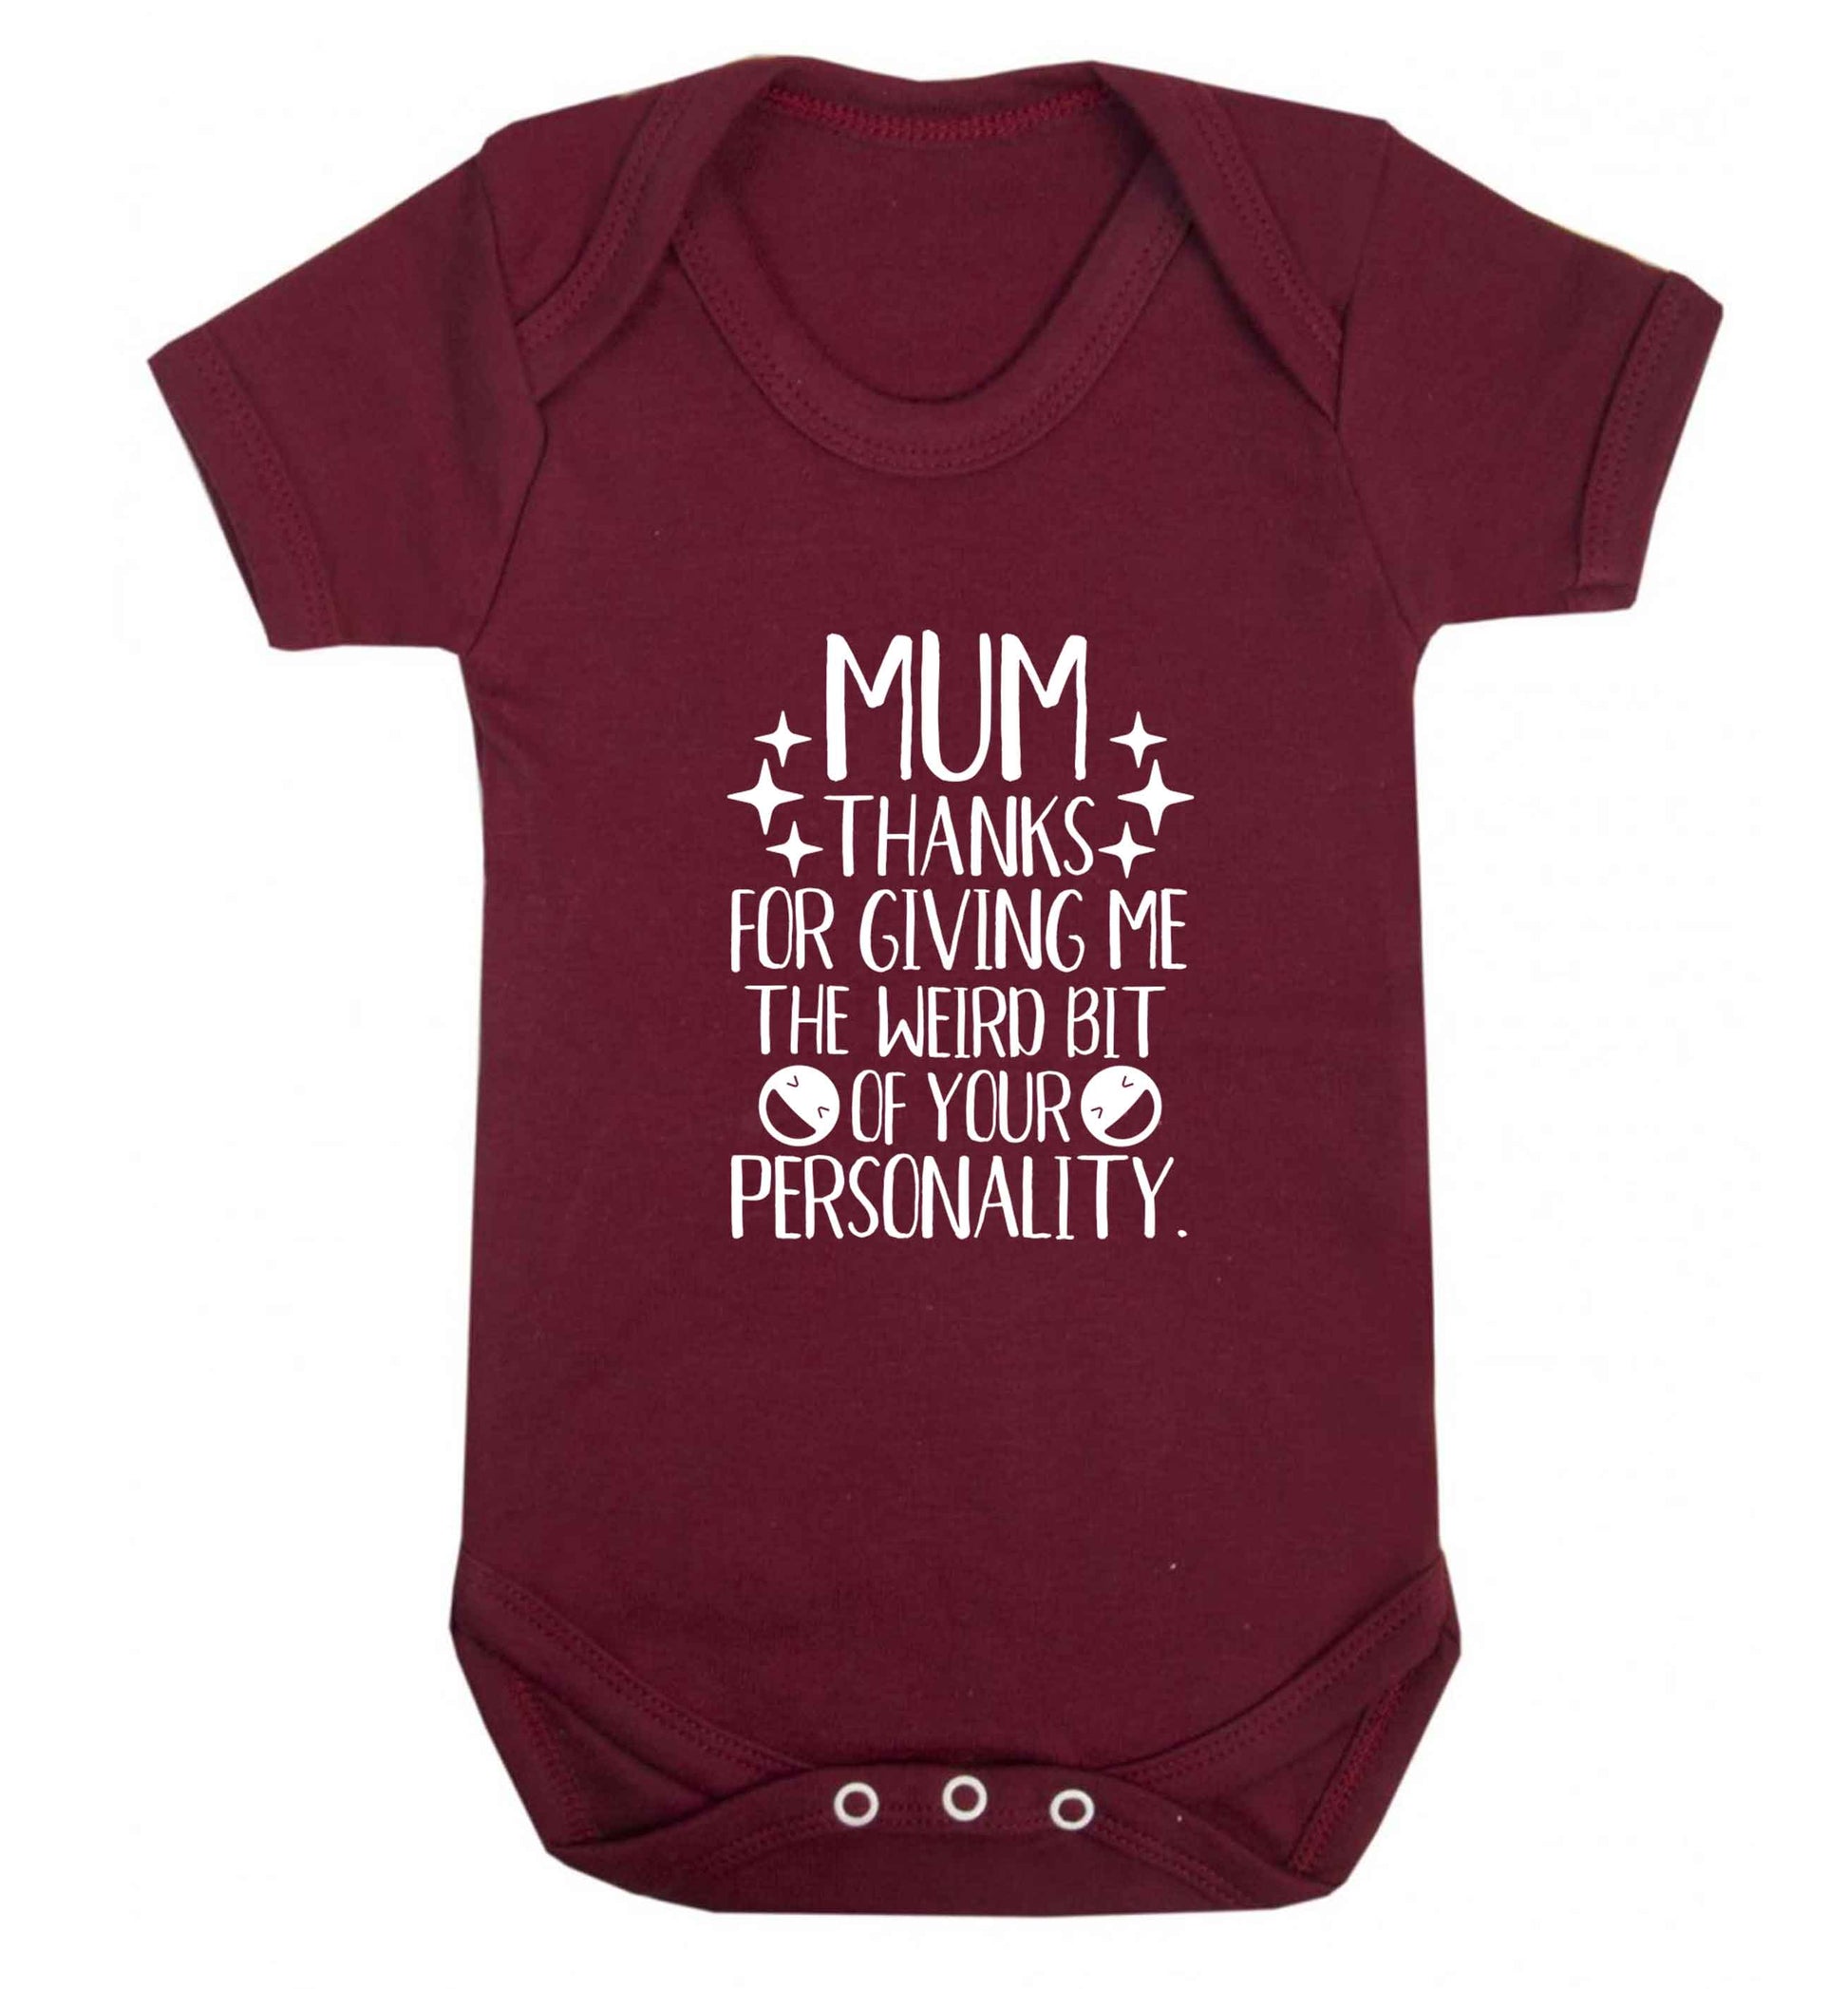 Mum, I love you more than halloumi and if you know me at all you know how deep that is baby vest maroon 18-24 months